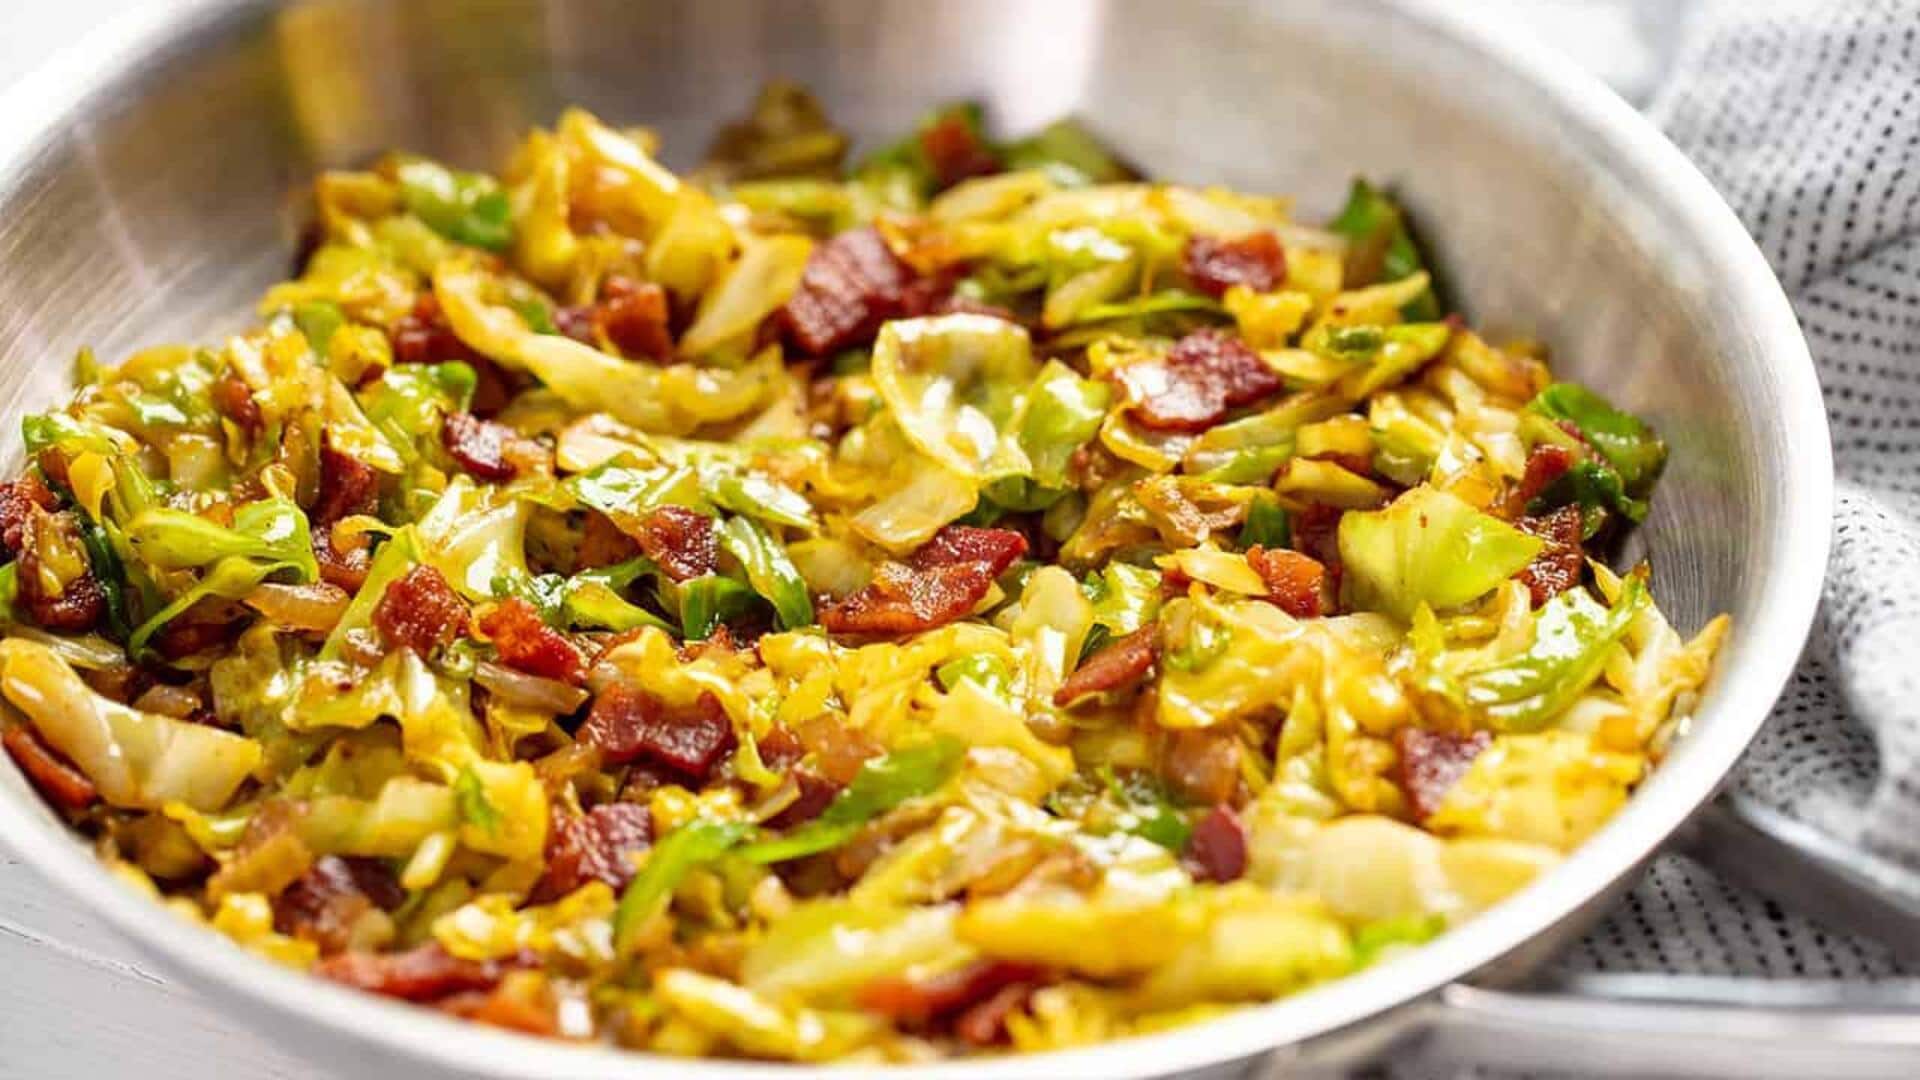 Savor this simple old-fashioned fried cabbage dish this winter